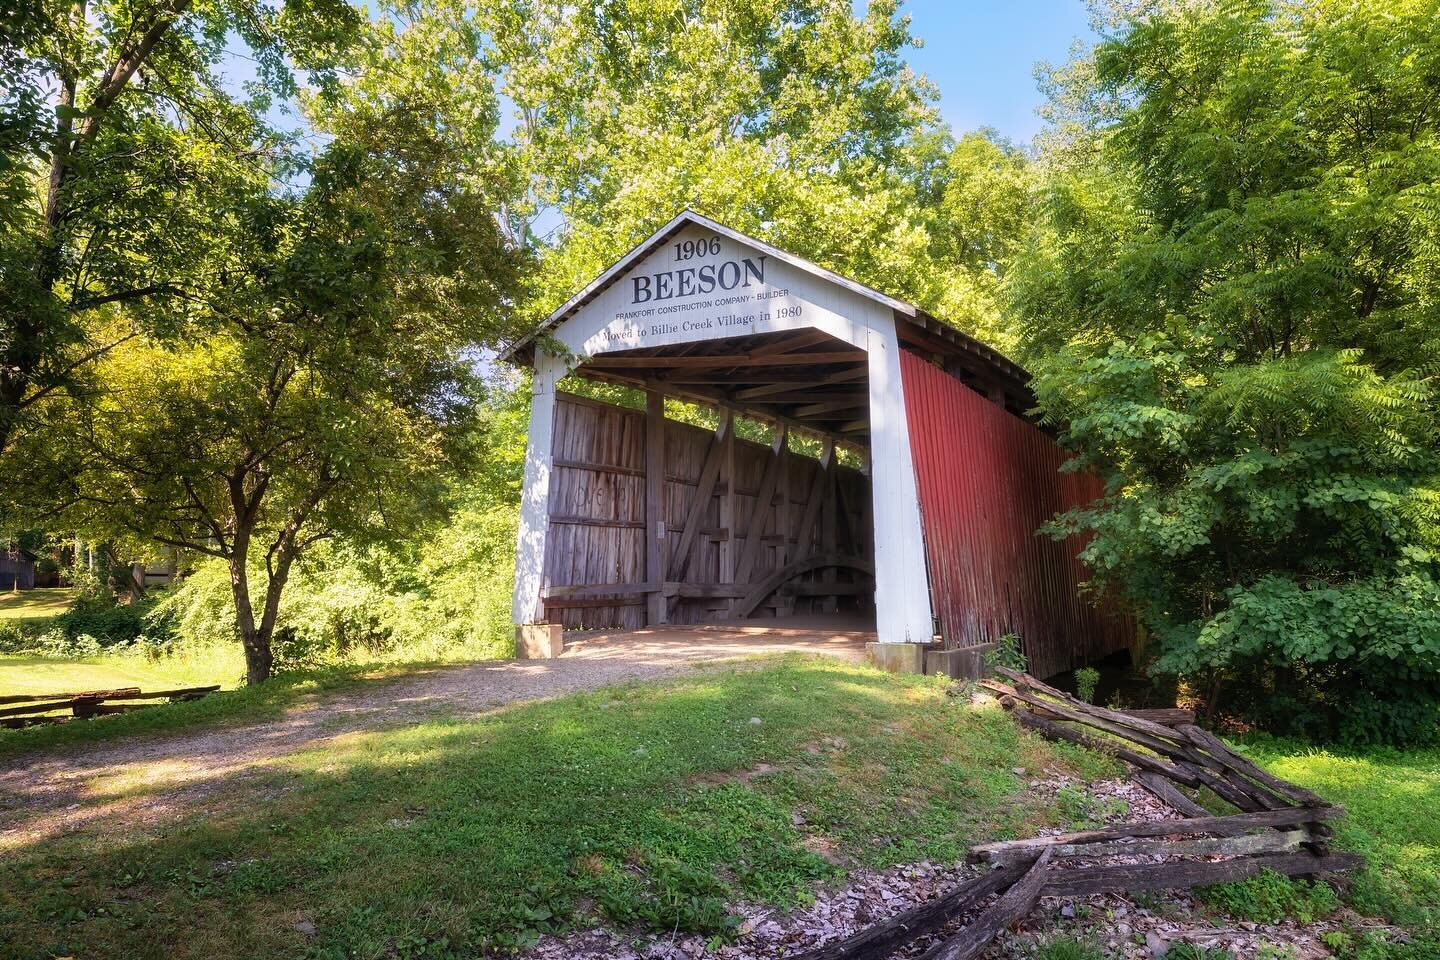 Do you have a favorite Parke County Covered Bridge!? With 31 beautiful options, it&rsquo;s hard to choose! ❤️

Come visit Parke County, Indiana this spring for 31 covered bridges, 3 state parks, small-town charm, great food, shopping, antiques &amp; 